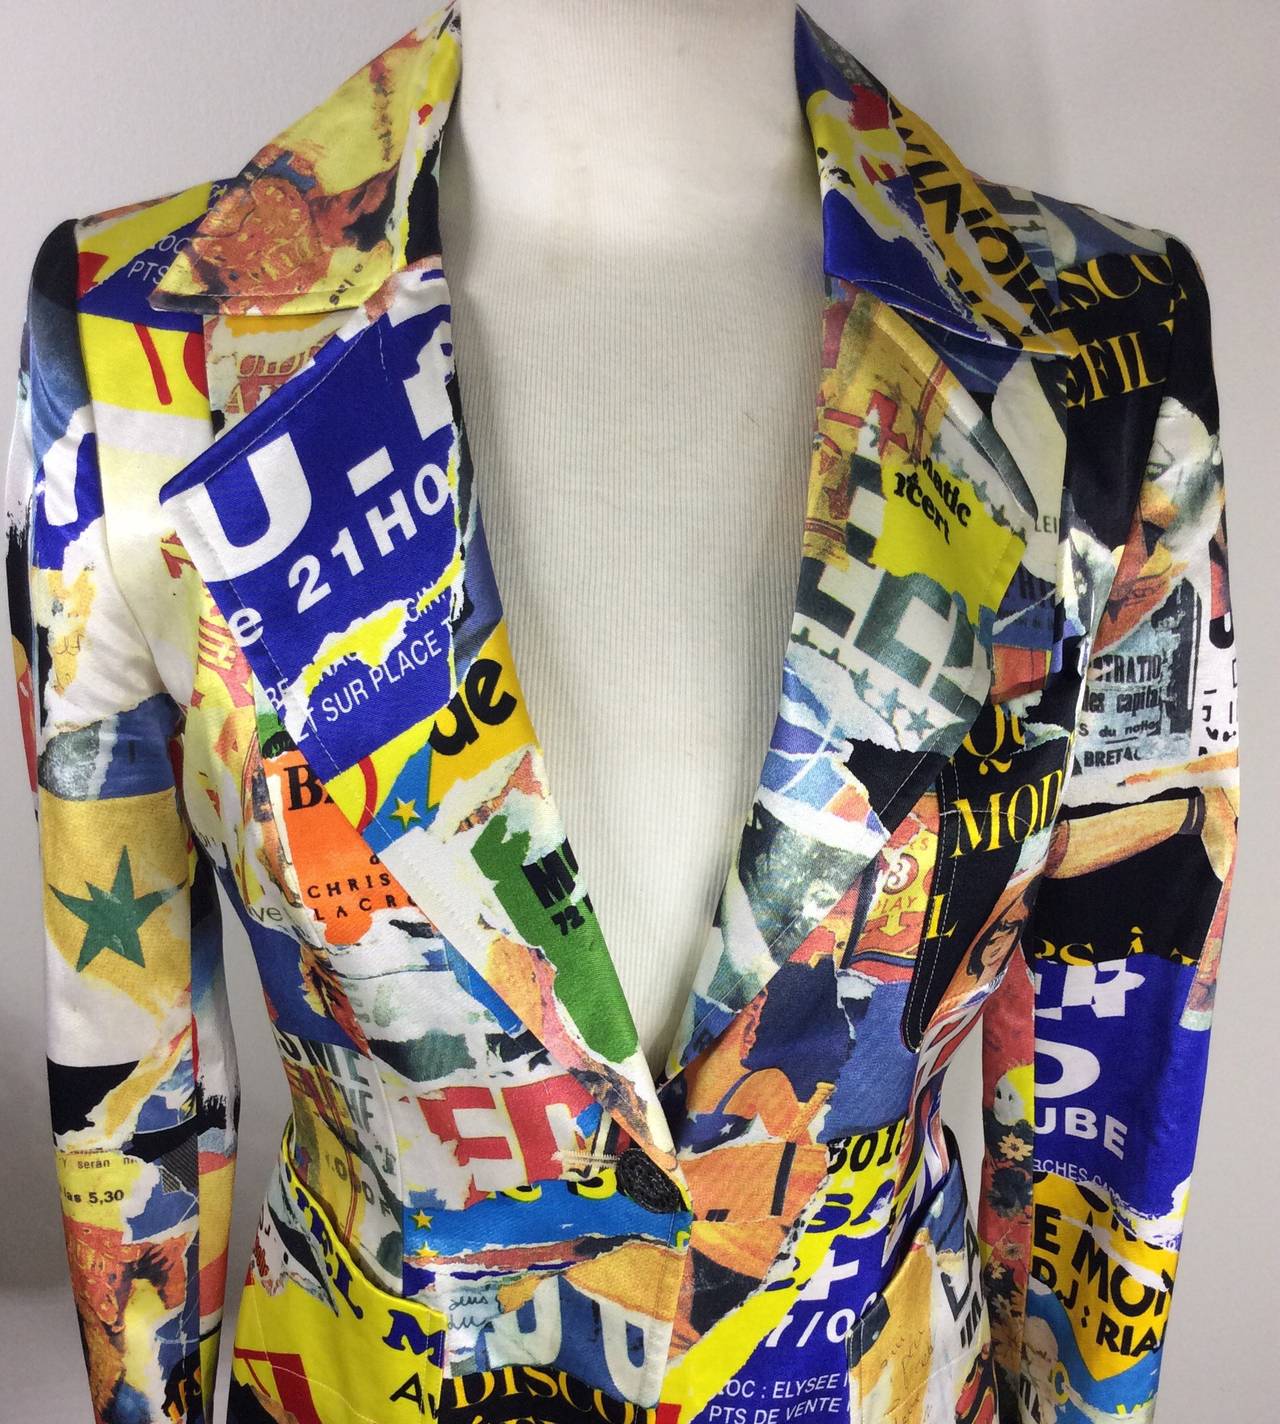 This is a stunning Bazar de Christian Lacroix vibrant color print blazer jacket
Size 36
Made in France